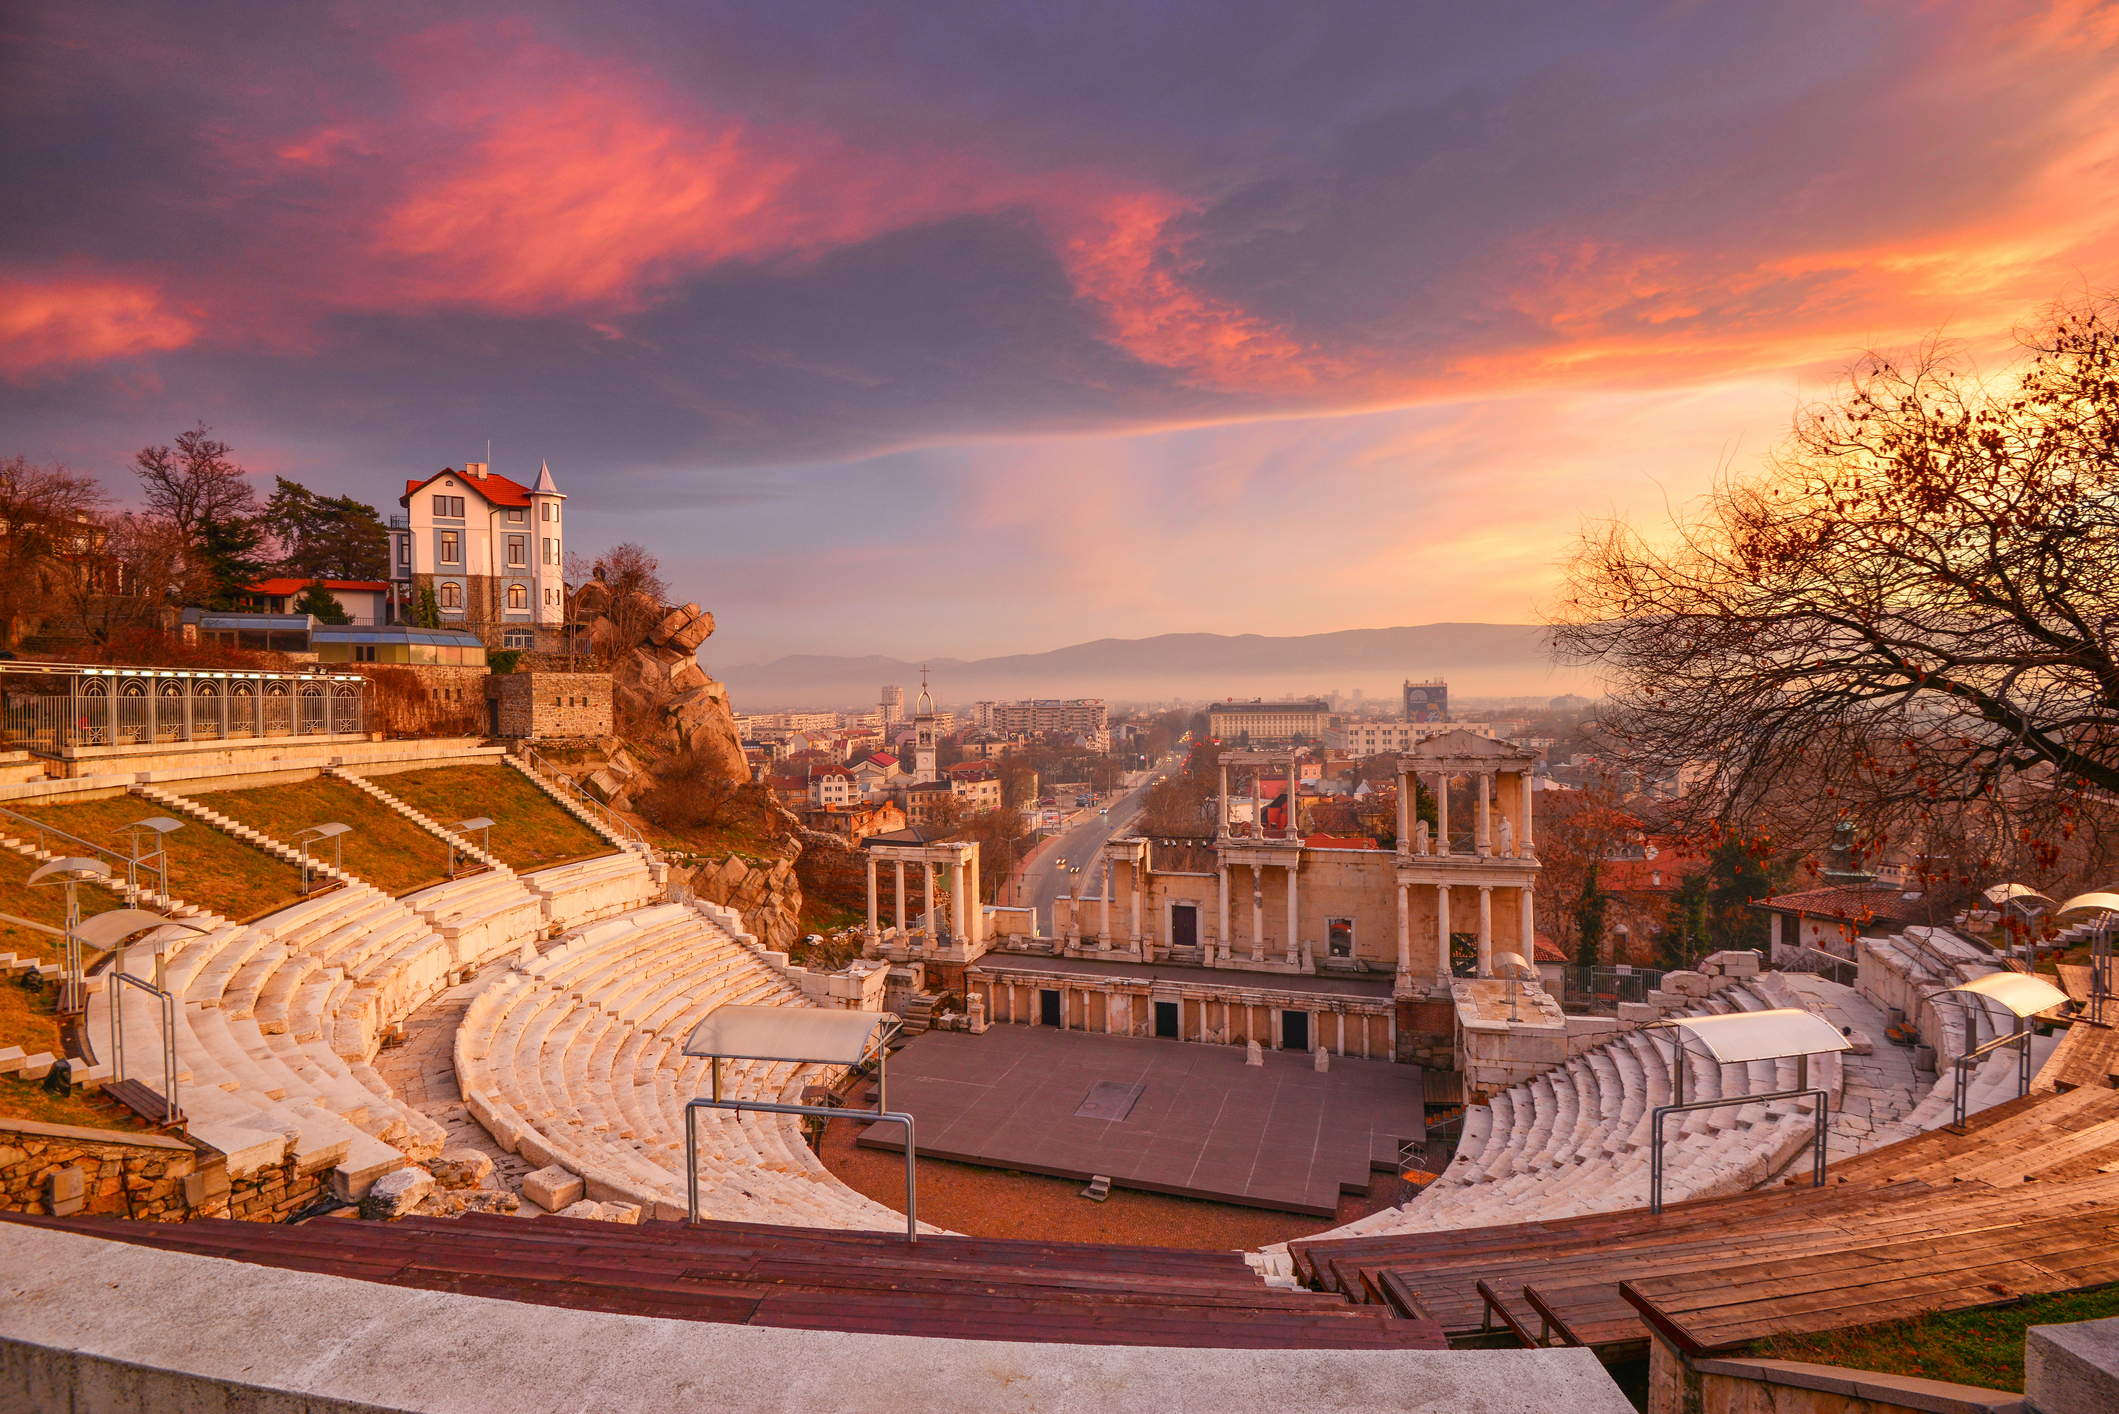 Sunset over an ancient outdoor amphitheater with cityscape and dramatic sky in the background